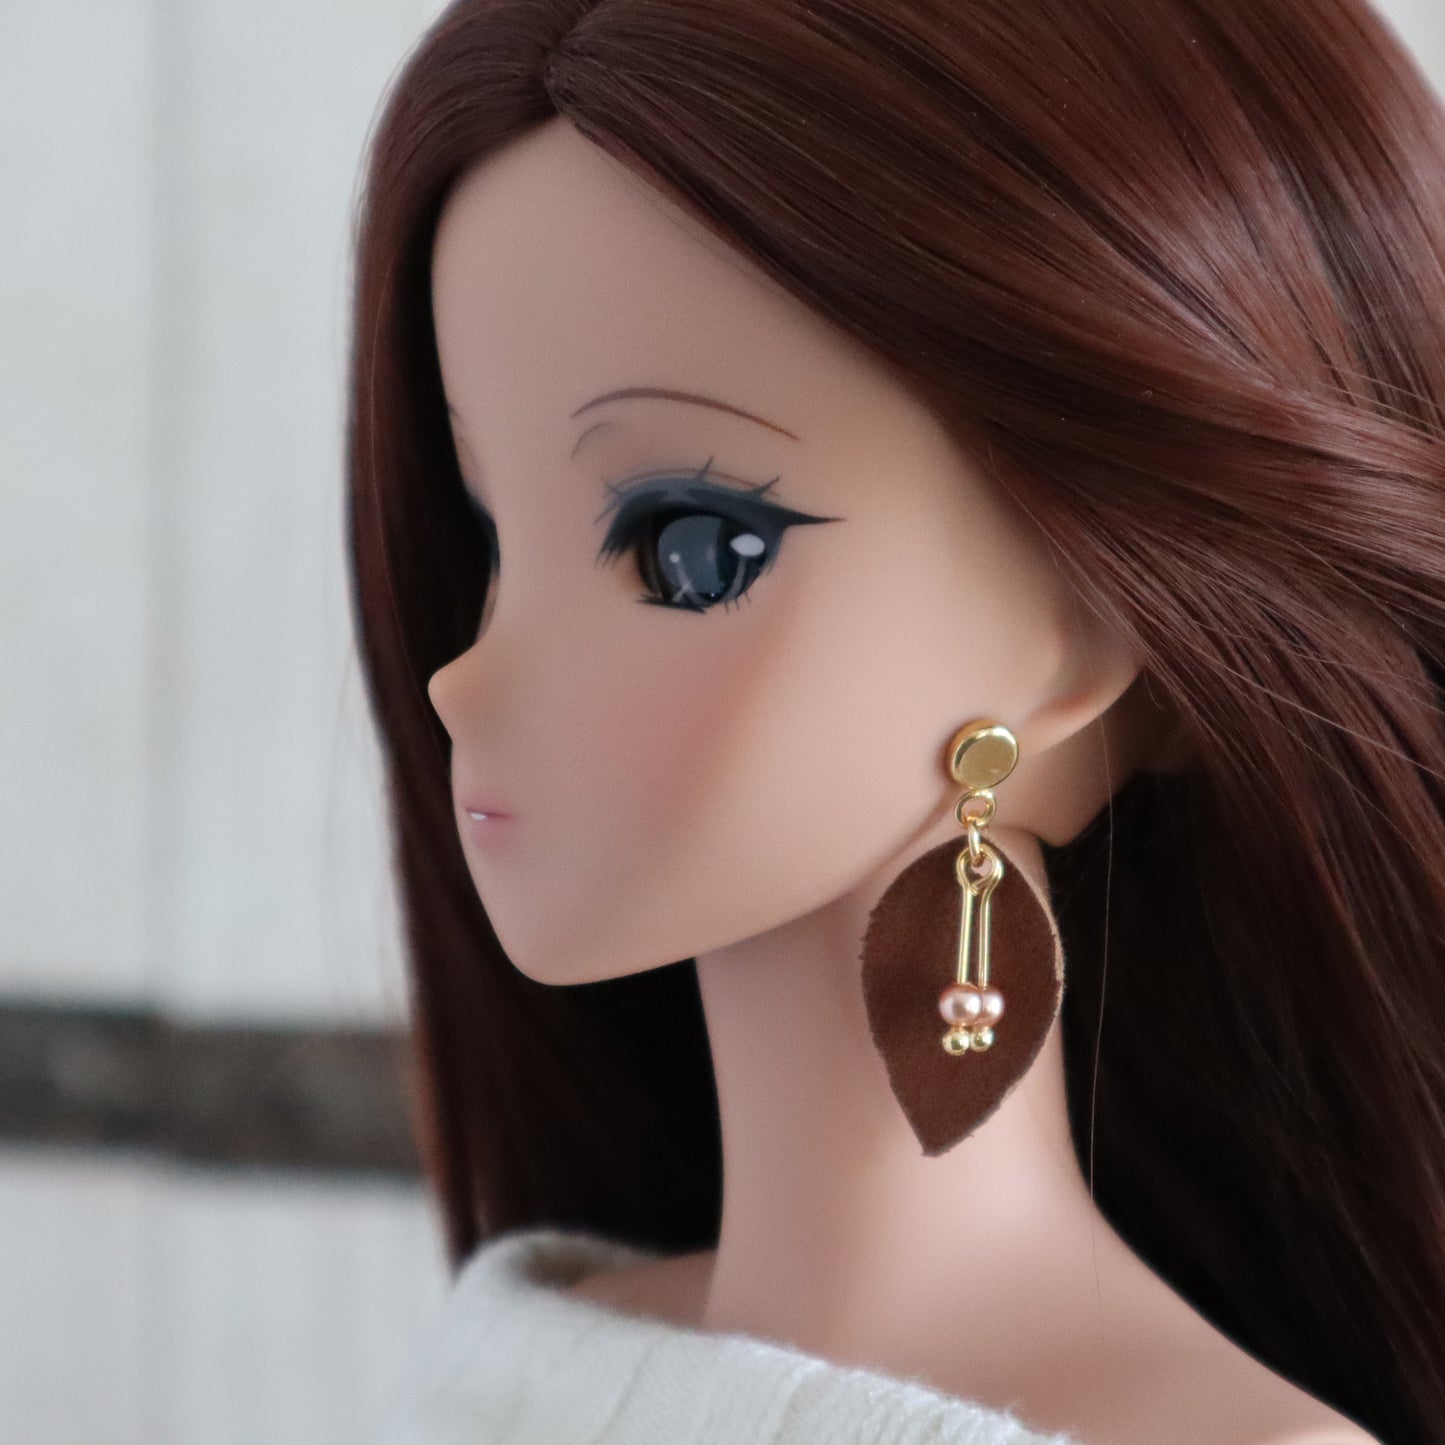 No-Hole Earrings for Vinyl Doll - Leather Leaf & Pearl (2 Styles)